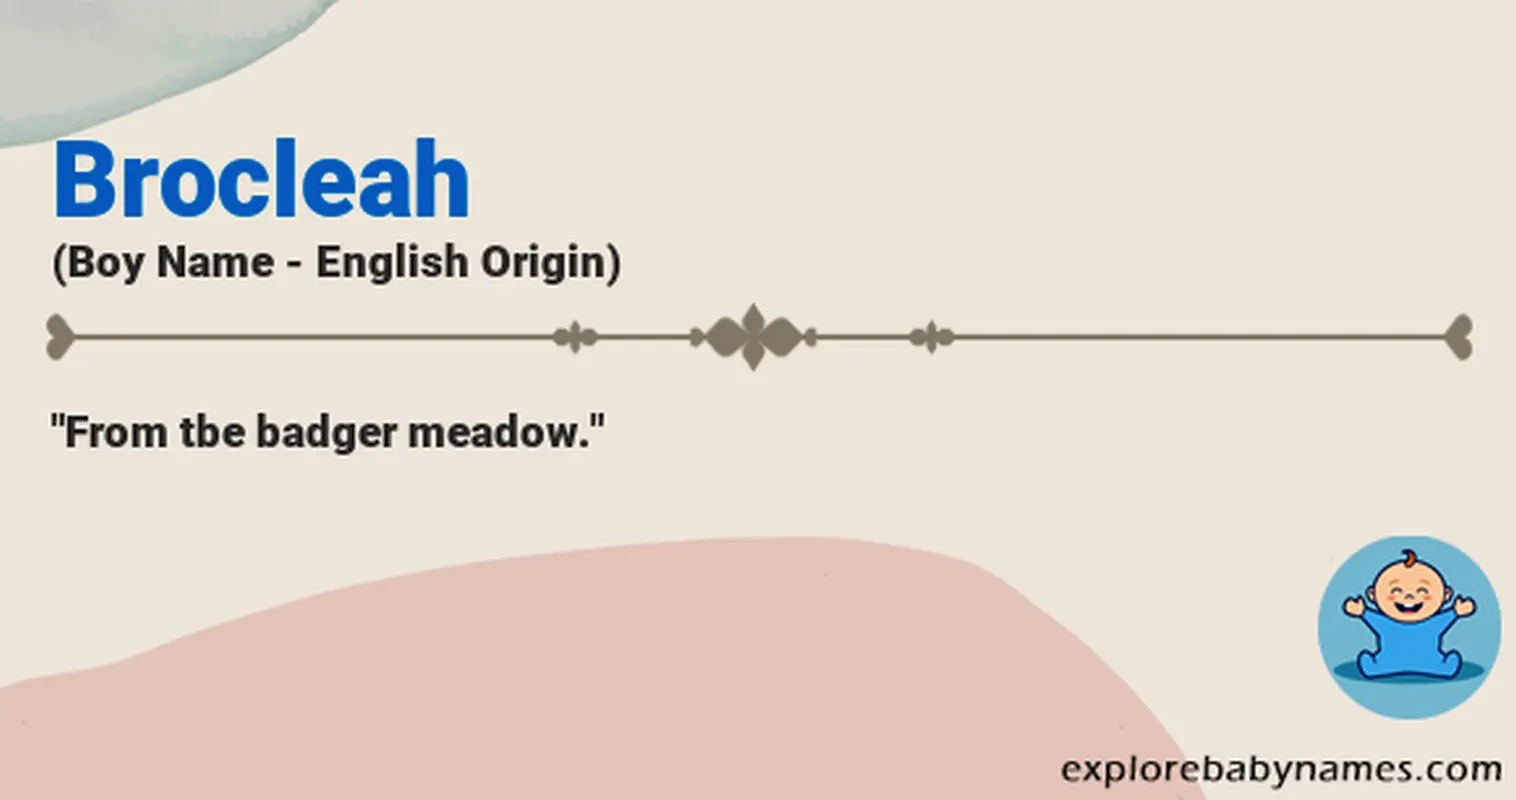 Meaning of Brocleah